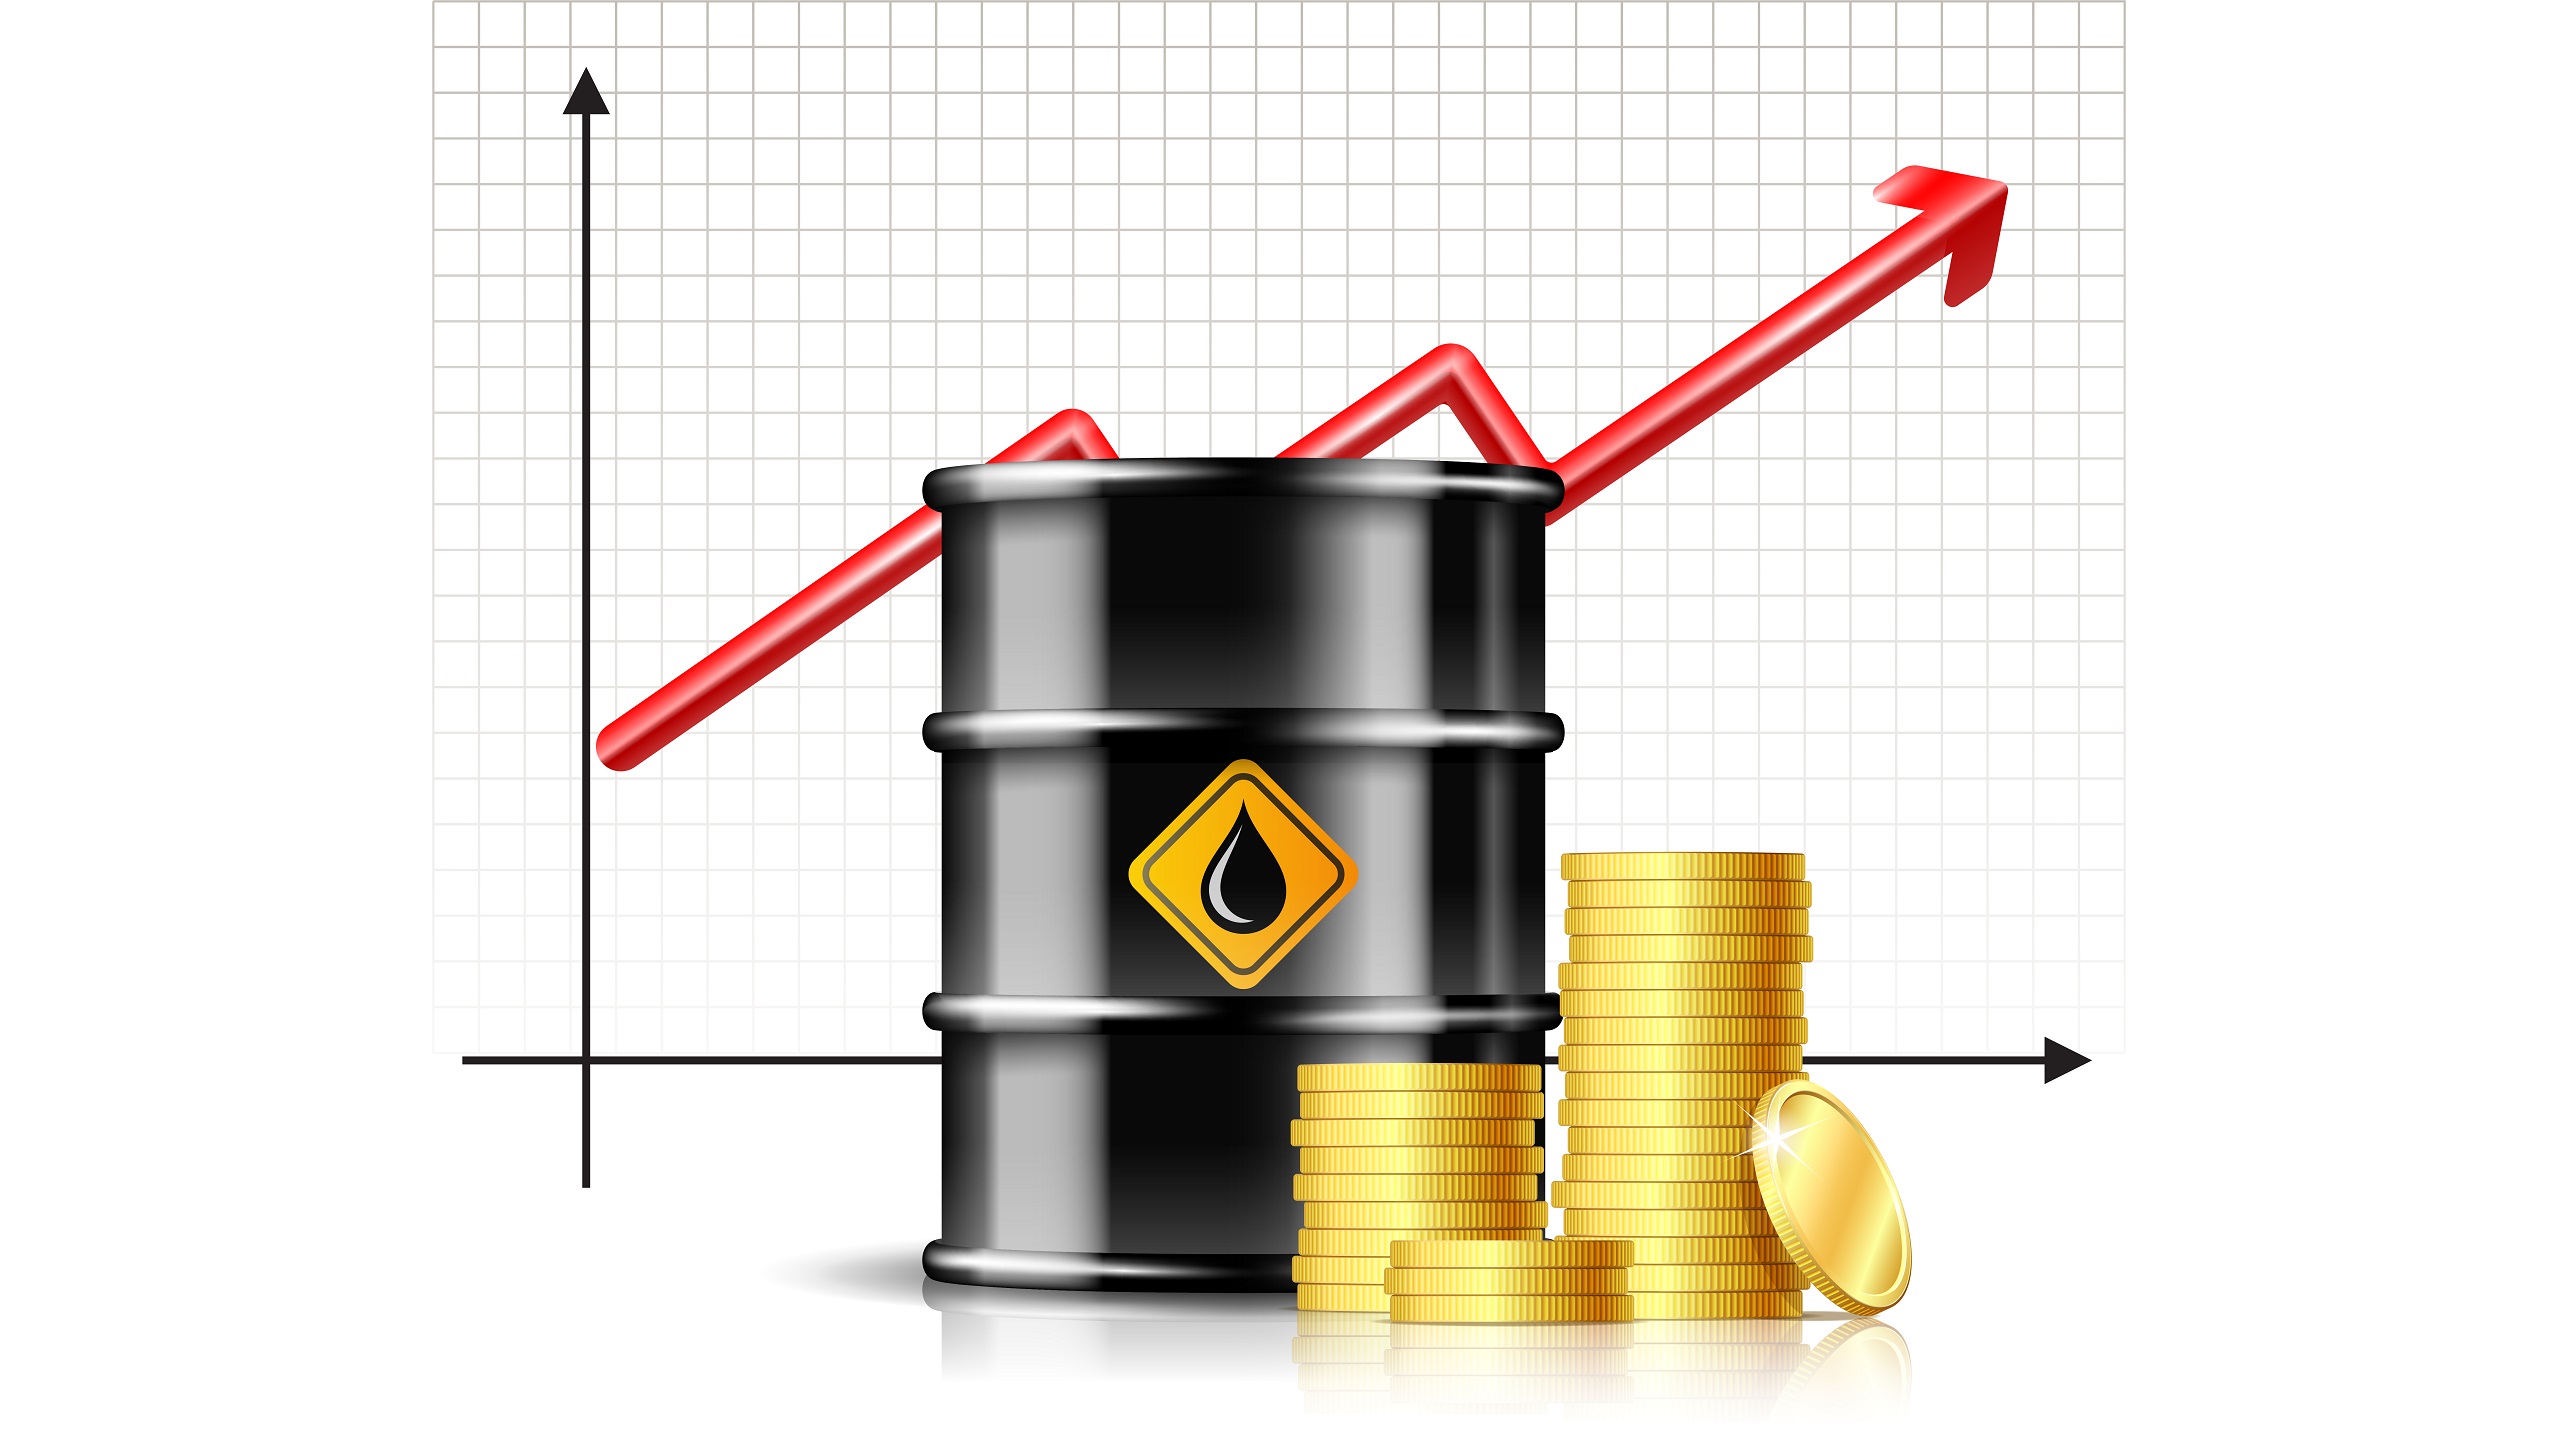 Oil, Gold Surge, Share Prices Plummet in Response to Russian Invasion